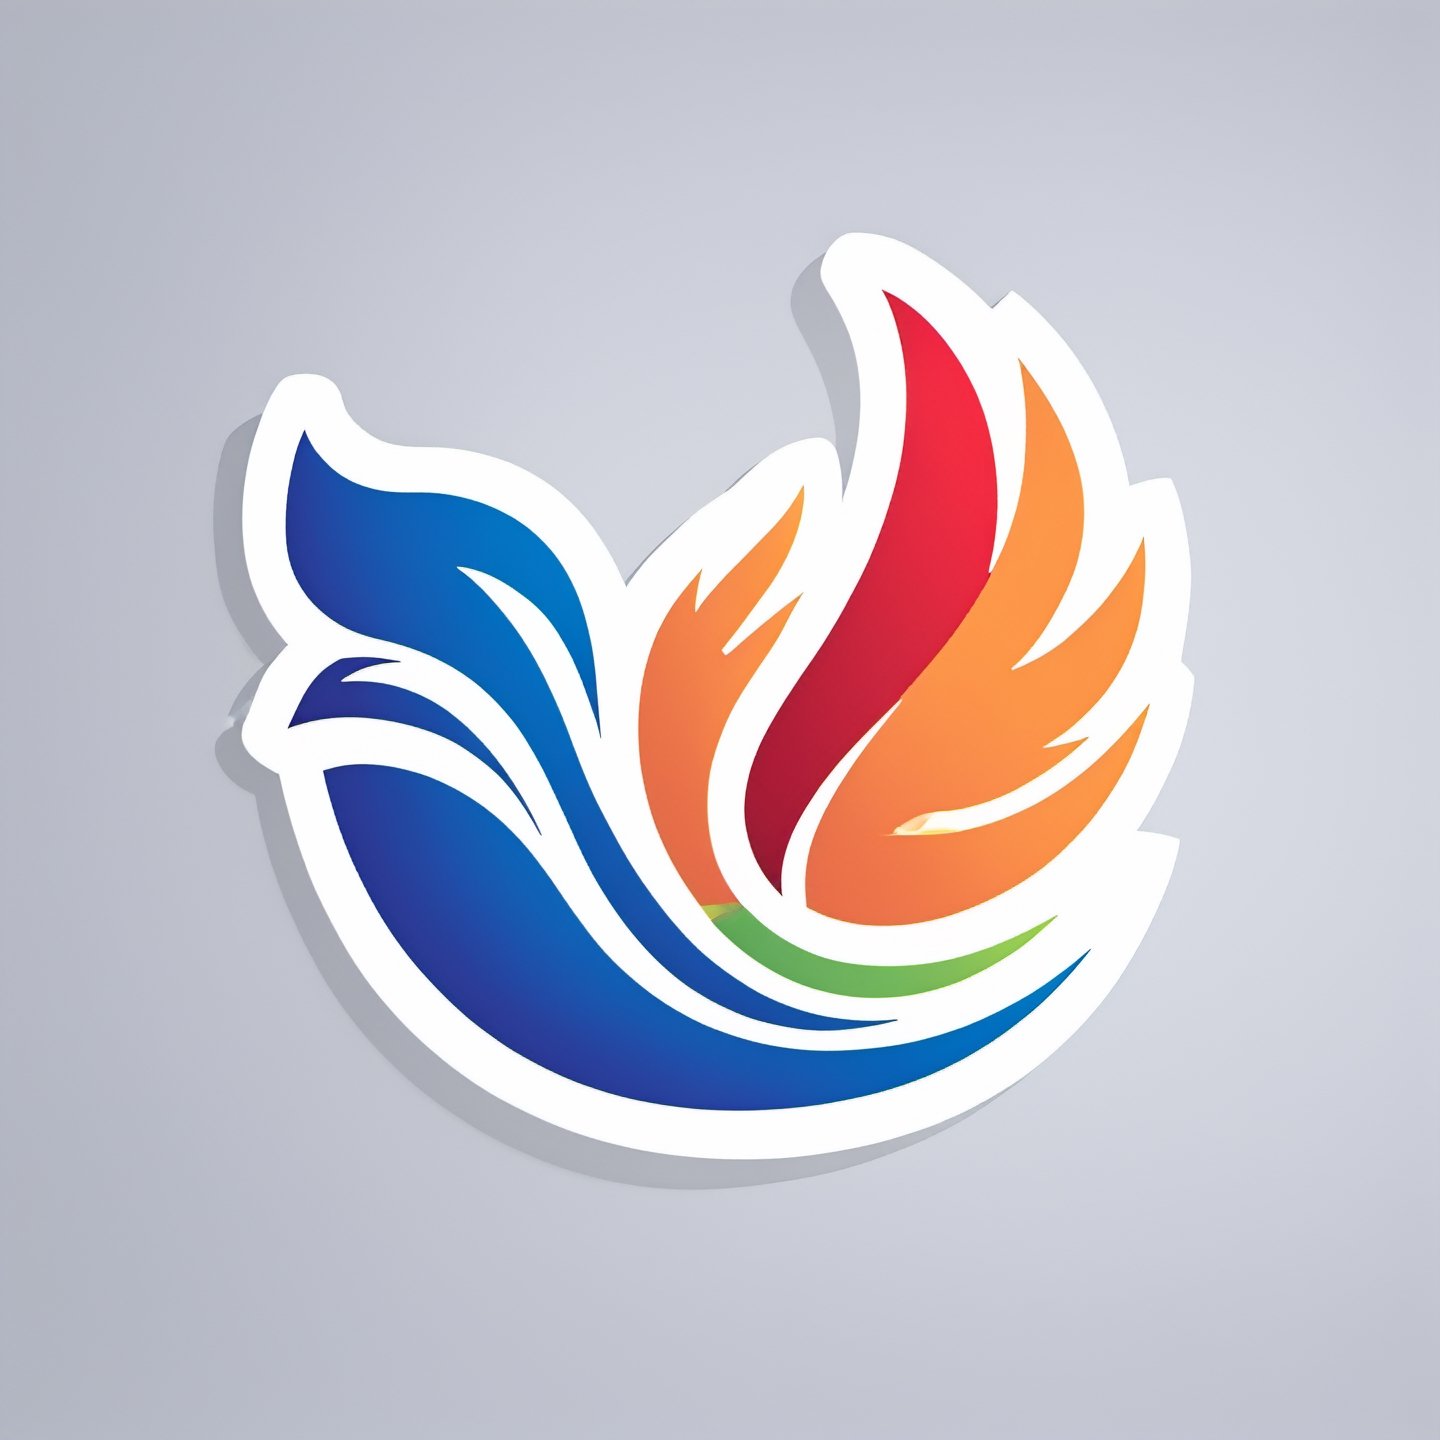 ((vector illustration, flat design)), (((phoenix logo))), ((open wing:1.3)), (facing right:1.2) simple design elements, ((red orange white palette:1.3)), (bit of green and blue shade or highlight:1.2), abstract background, high quality, ultra-detailed, professional, modern style, eye-catching emblem, creative composition, sharp lines and shapes, stylish and clean, appealing to the eye, striking visual impact, playful and dynamic, crisp and vibrant colors, vivid color scheme, attractive contrast, bold and minimalistic, artistic flair, lively and energetic feel, catchy and memorable design, versatile and scalable graphics, modern and trendy aesthetic, fluid and smooth curves, professional and polished finish, artistic elegance, unique and original concept, sticker, negative space book,sticker,vector art illustration